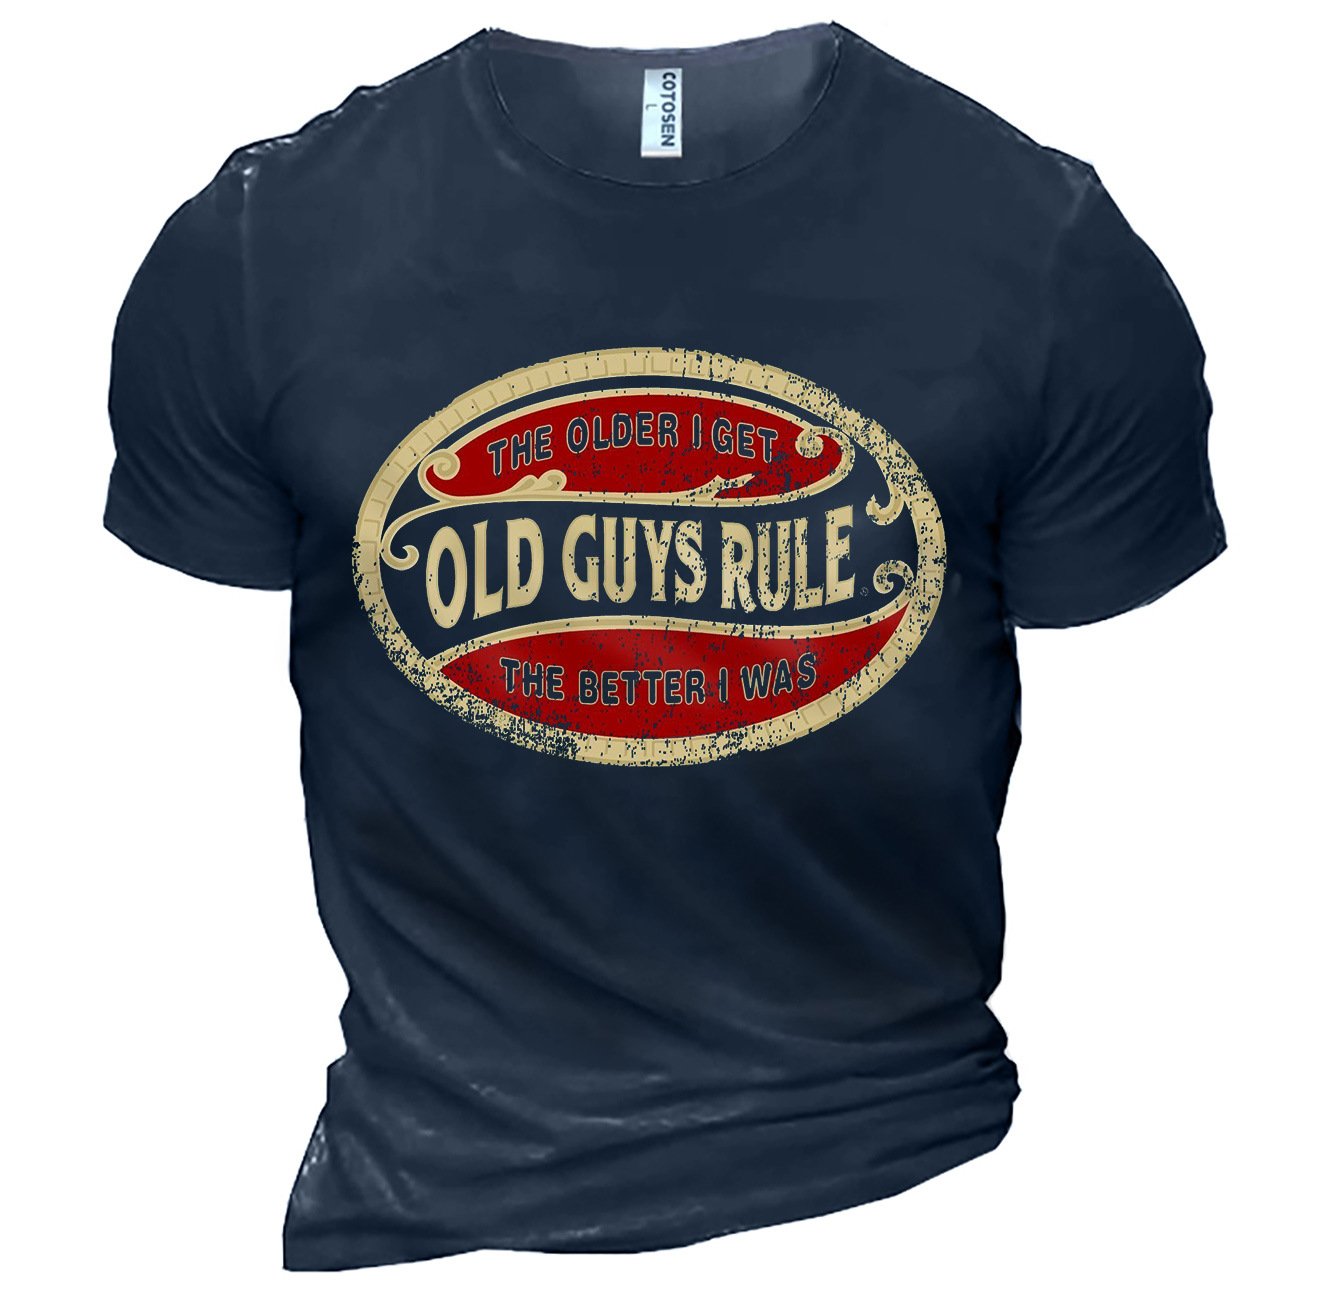 Men's The Older I Chic Get Old Guys Rule Print Cotton T-shirt